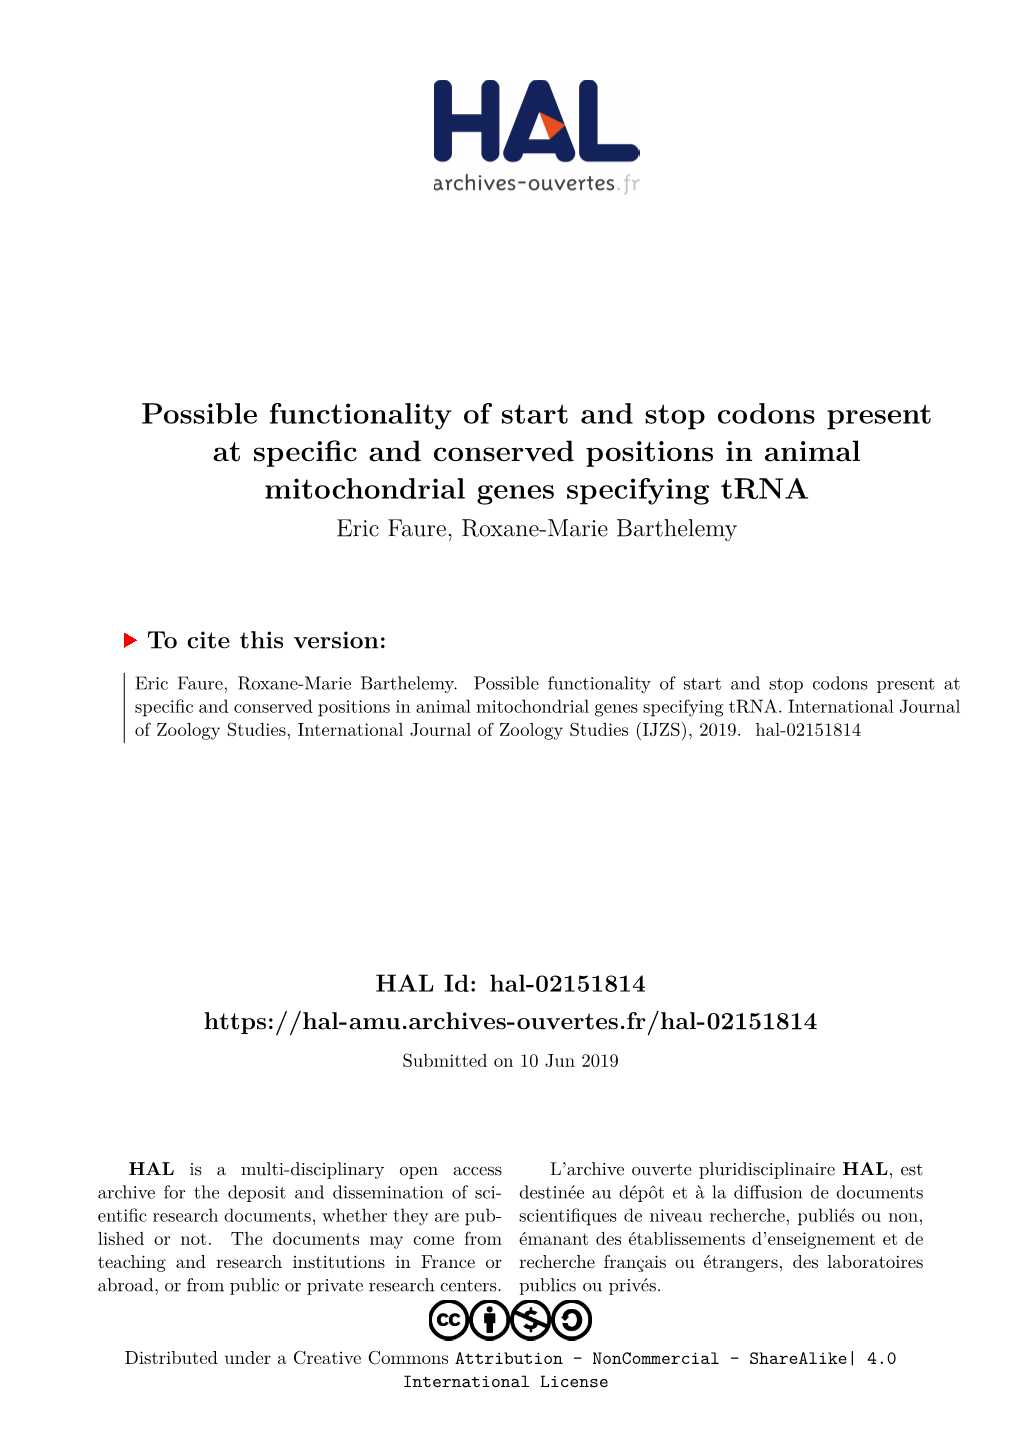 Possible Functionality of Start and Stop Codons Present at Specific And